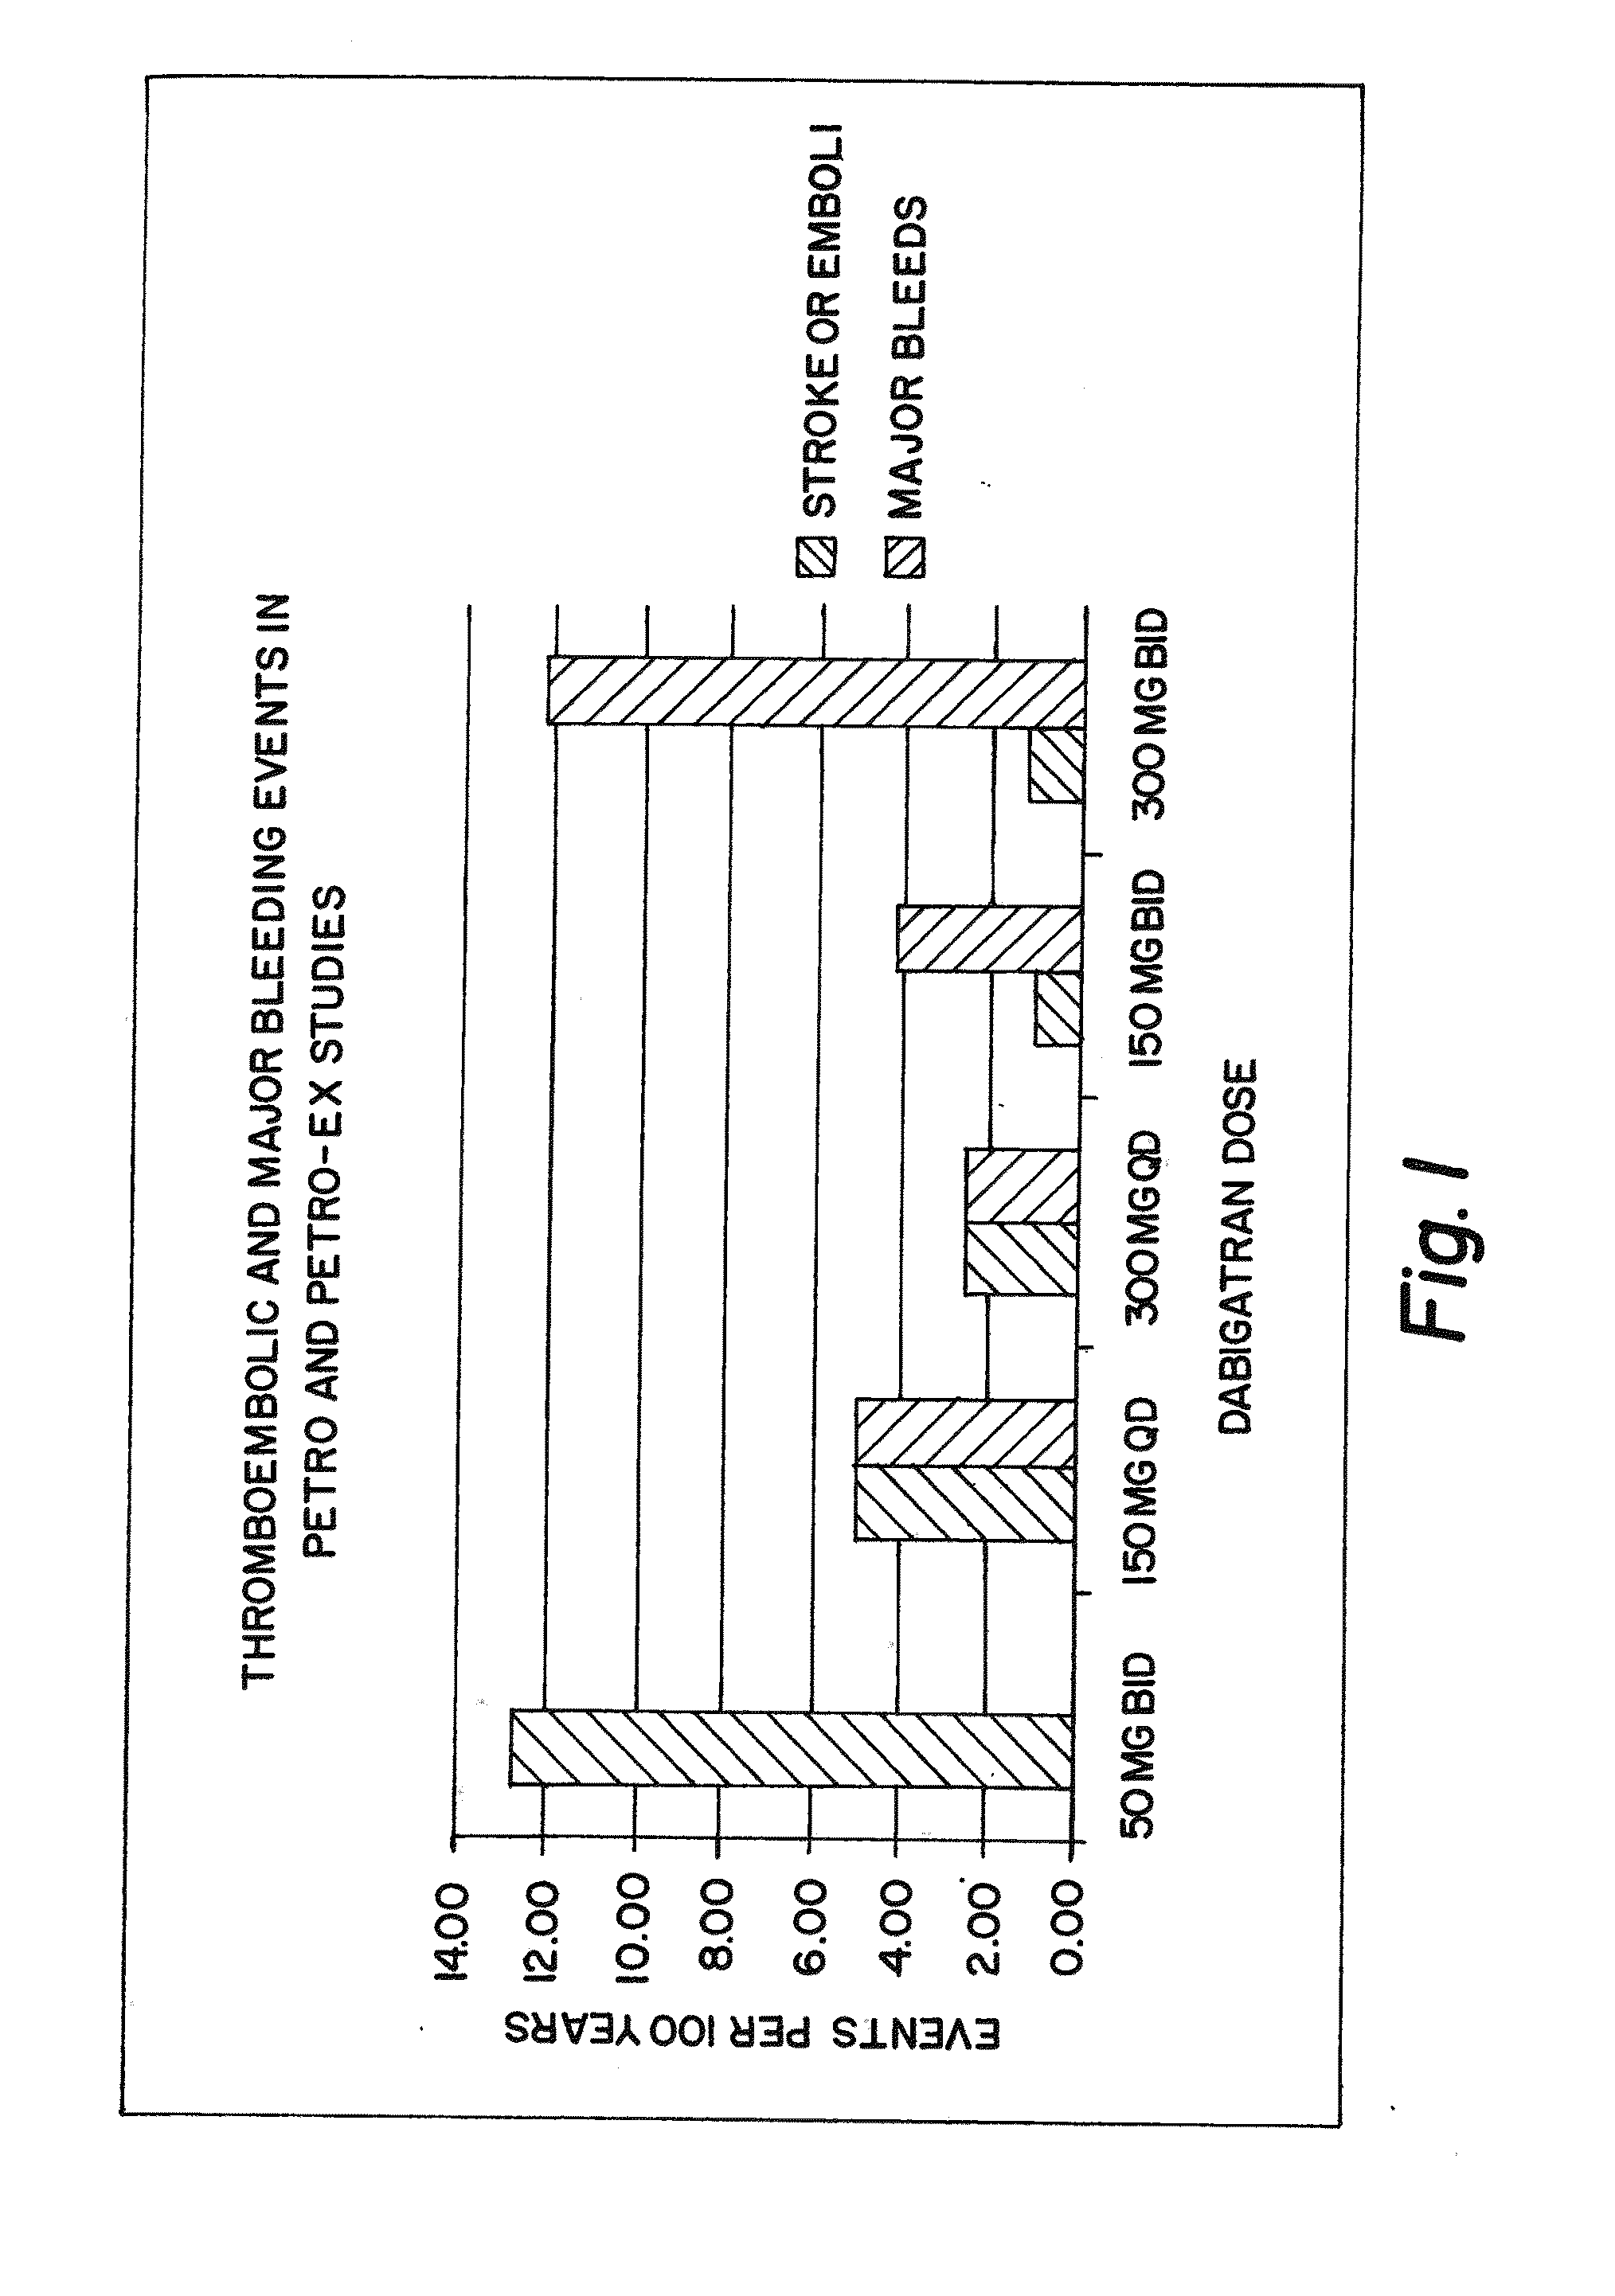 Method for treating or preventing thrombosis using dabigatran etexilate or a salt thereof with improved efficacy over conventional warfarin therapy